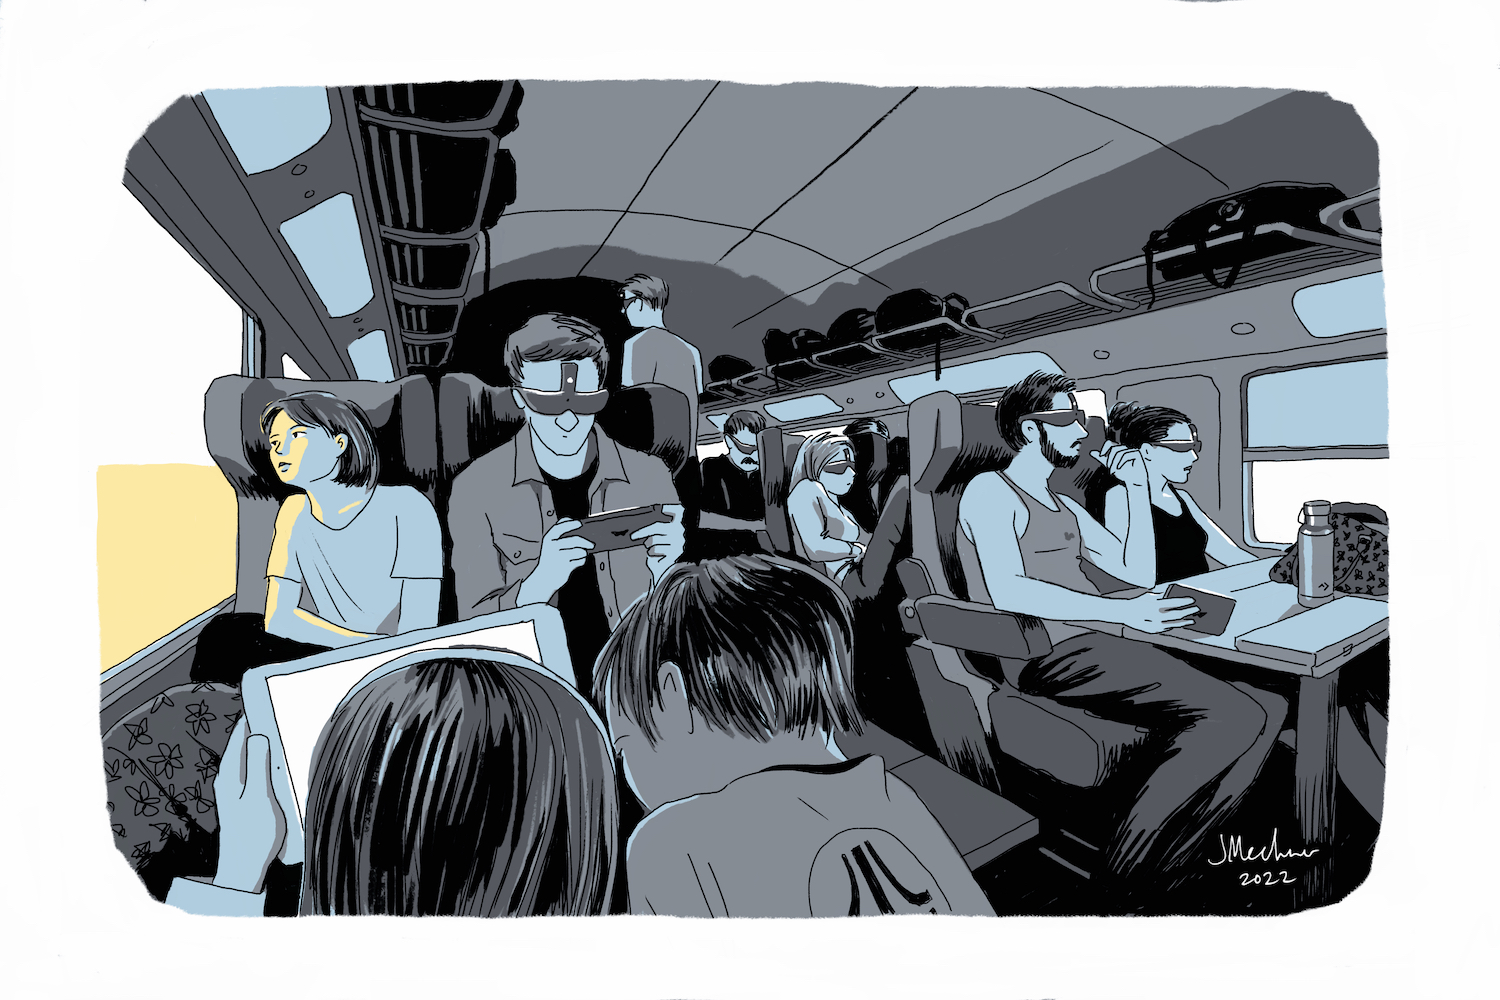 An illustration shows people playing a portable game console on a train — one in a VR headset, another with kids looking together at the same screen.